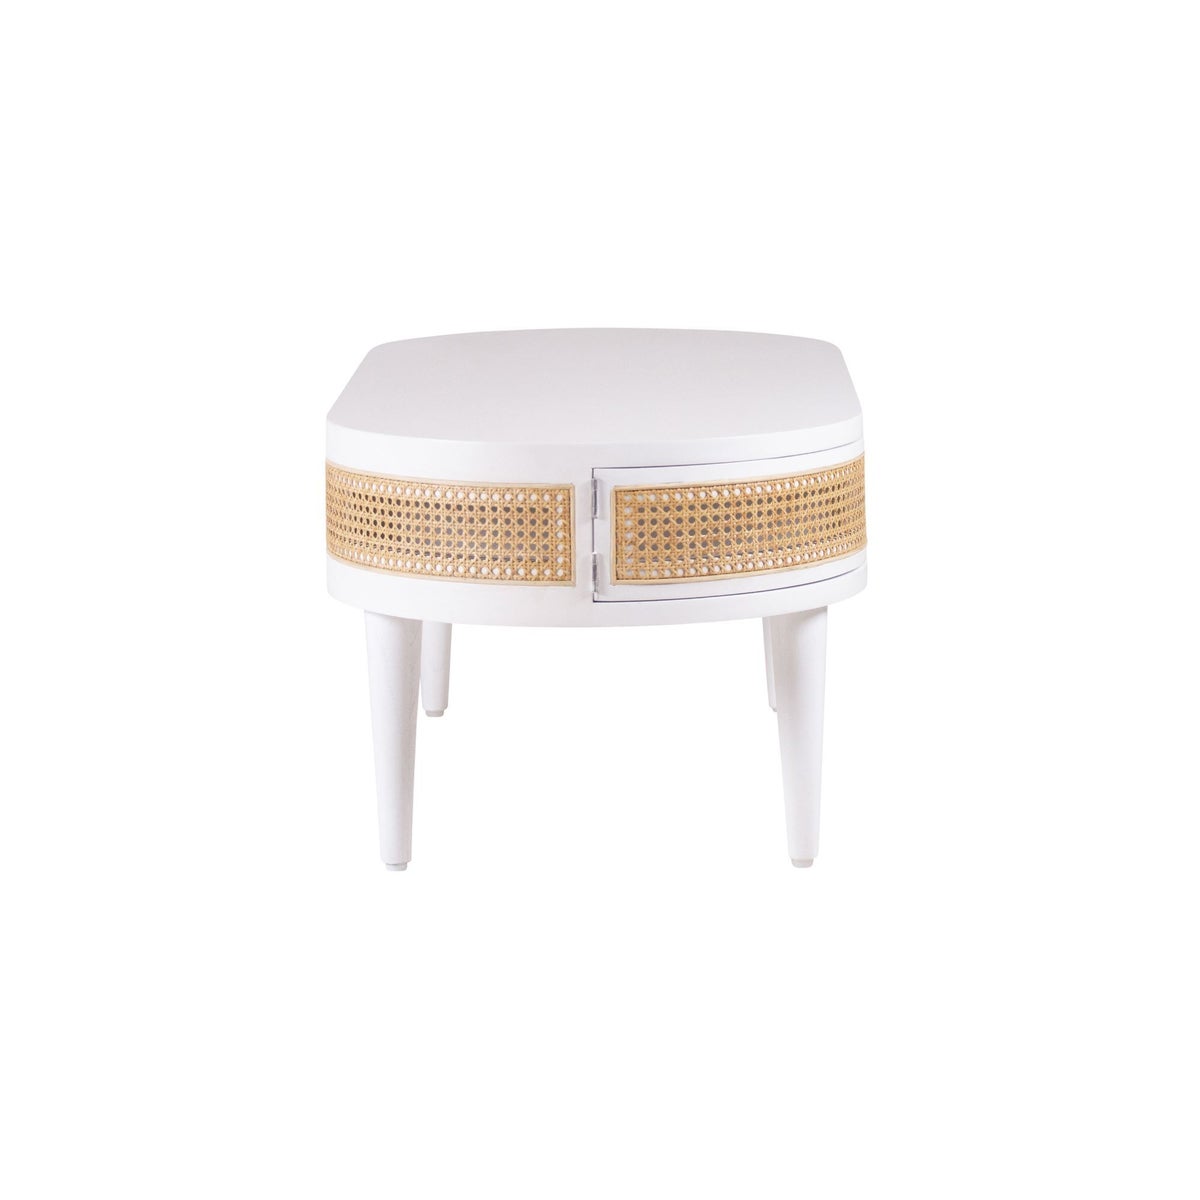 Stockholm Coffee Table in White